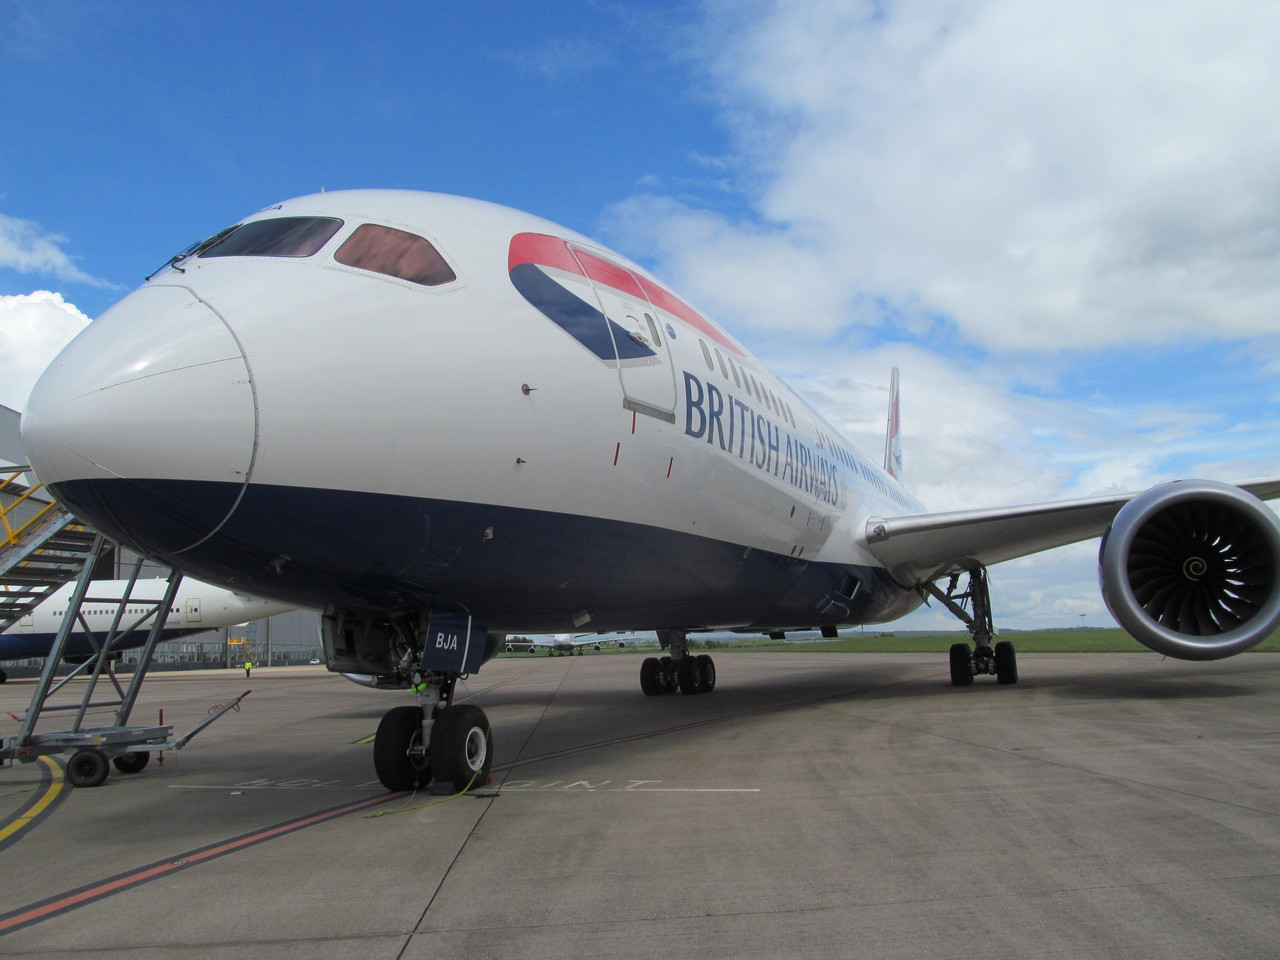 British Airways doubles its IFE content for enhanced customer experience